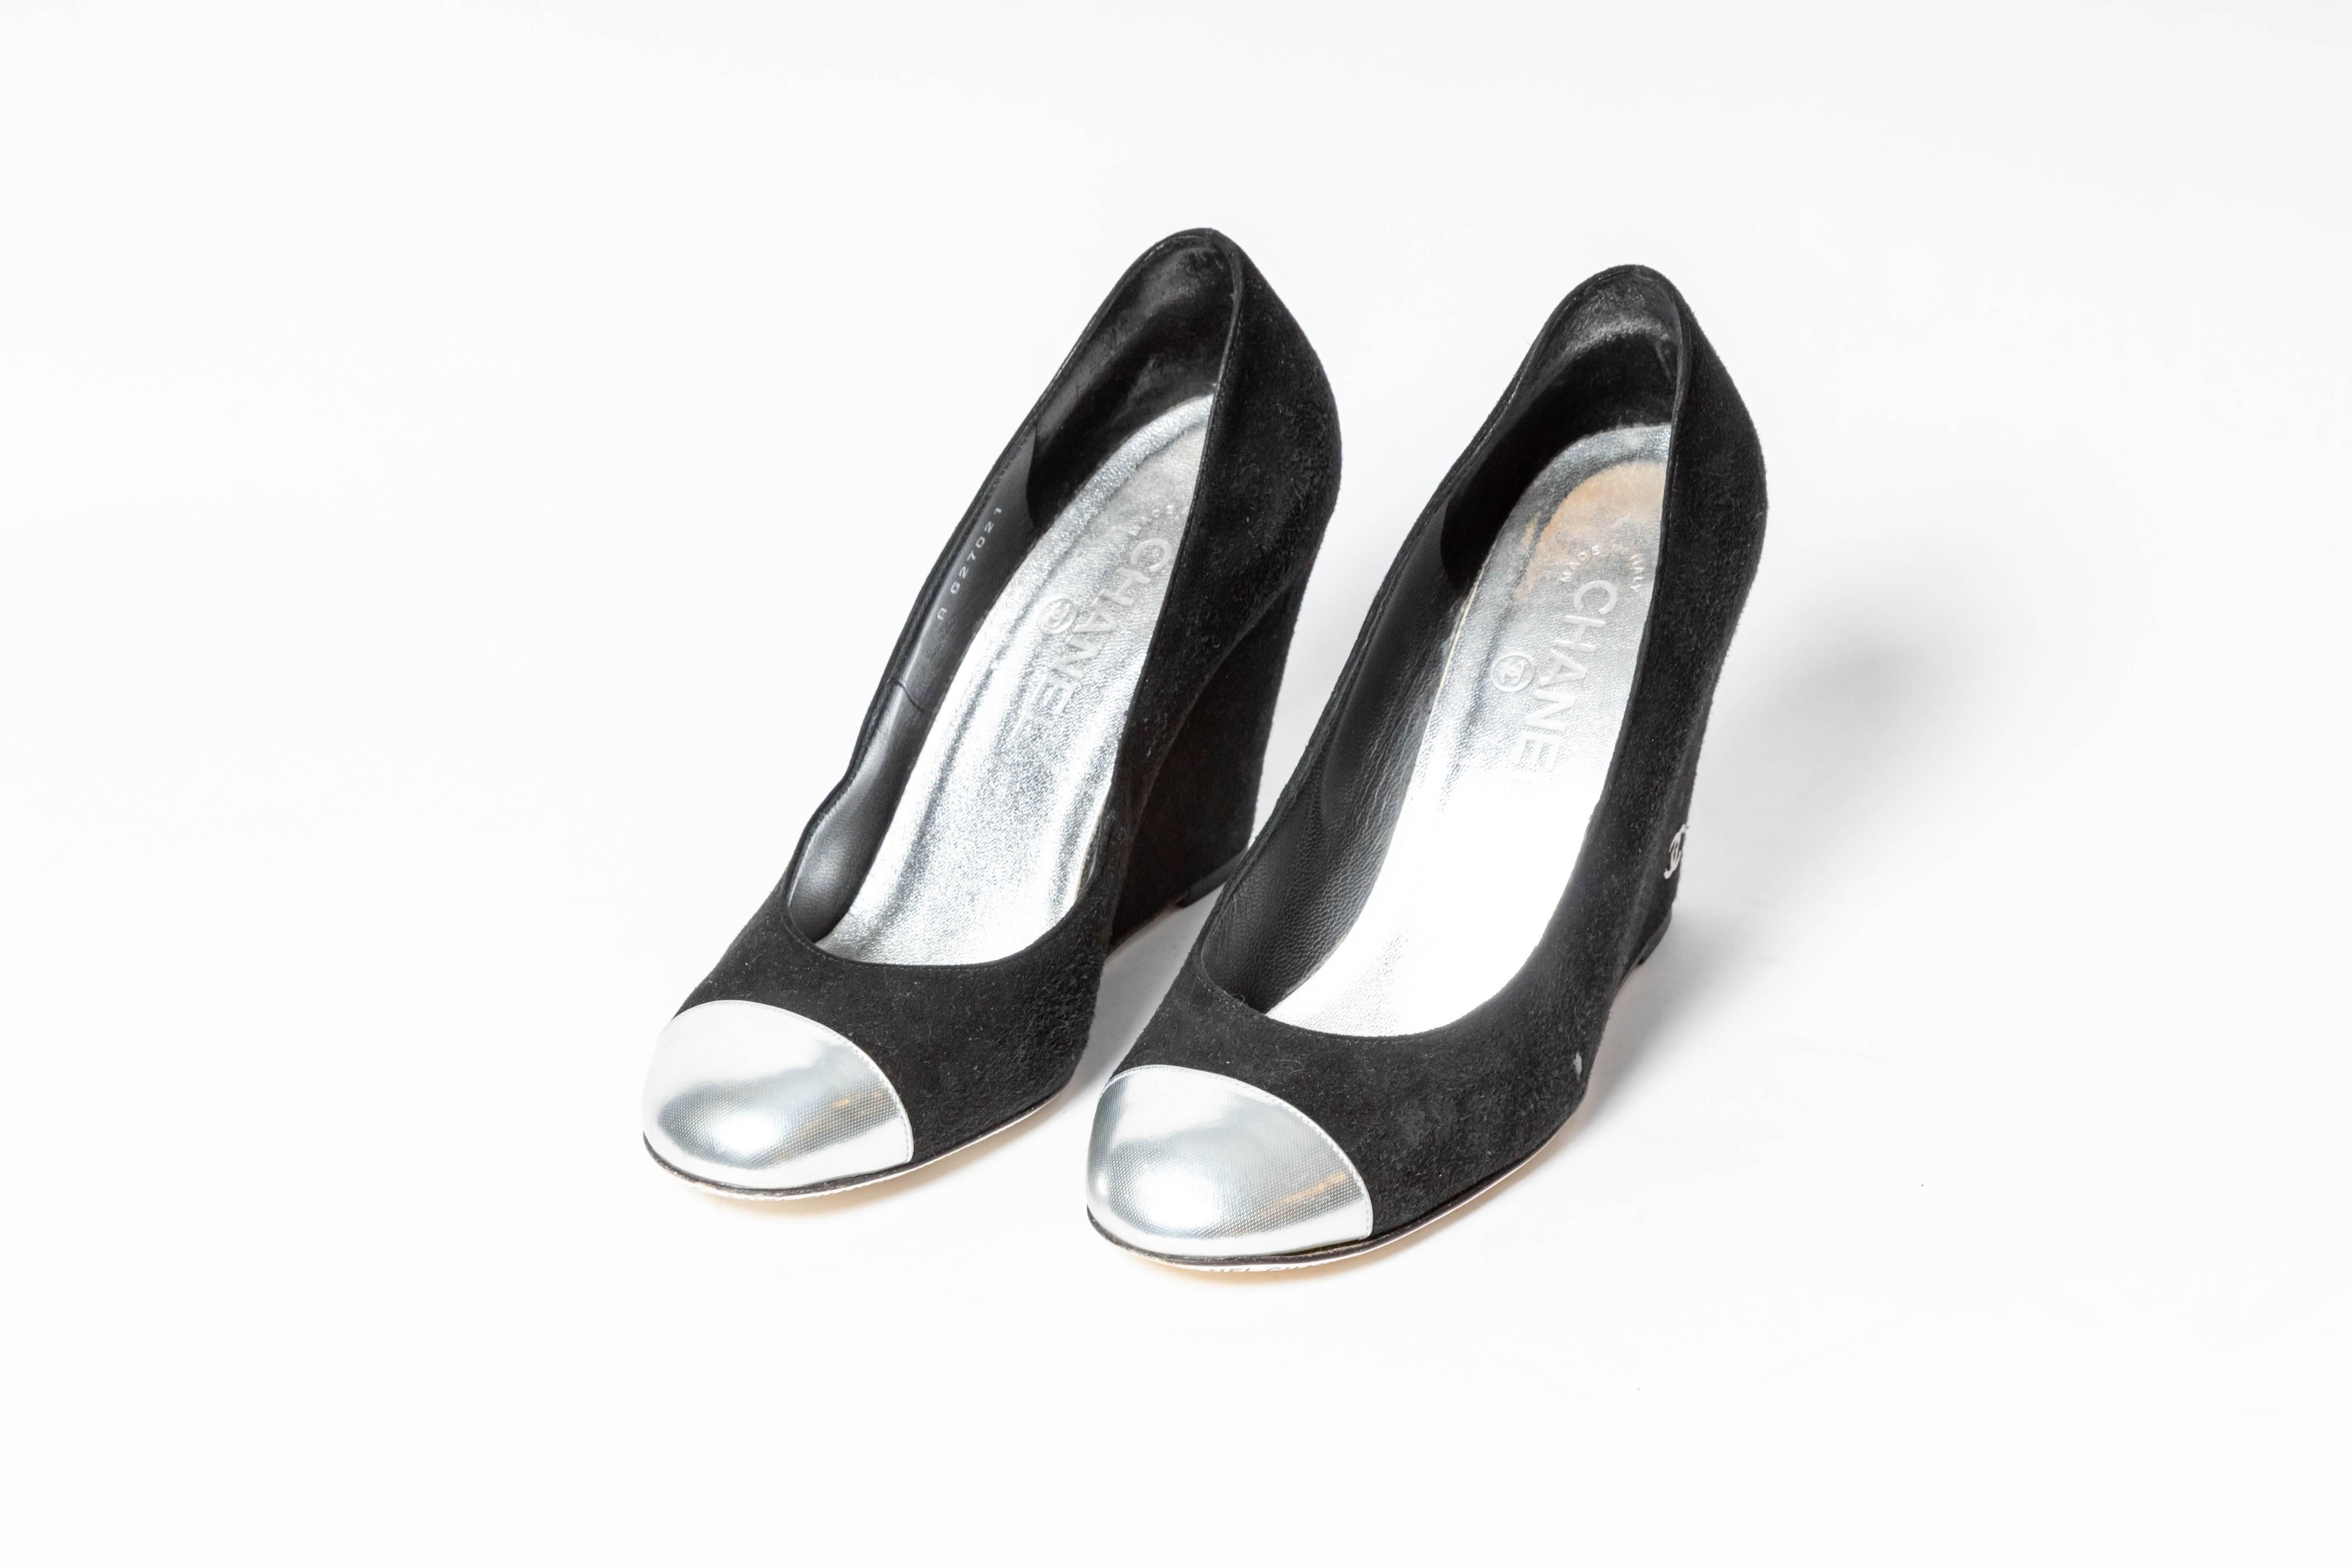 Women's Chanel Silver and Black Suede Wedges - Size 37.5 / 7.5